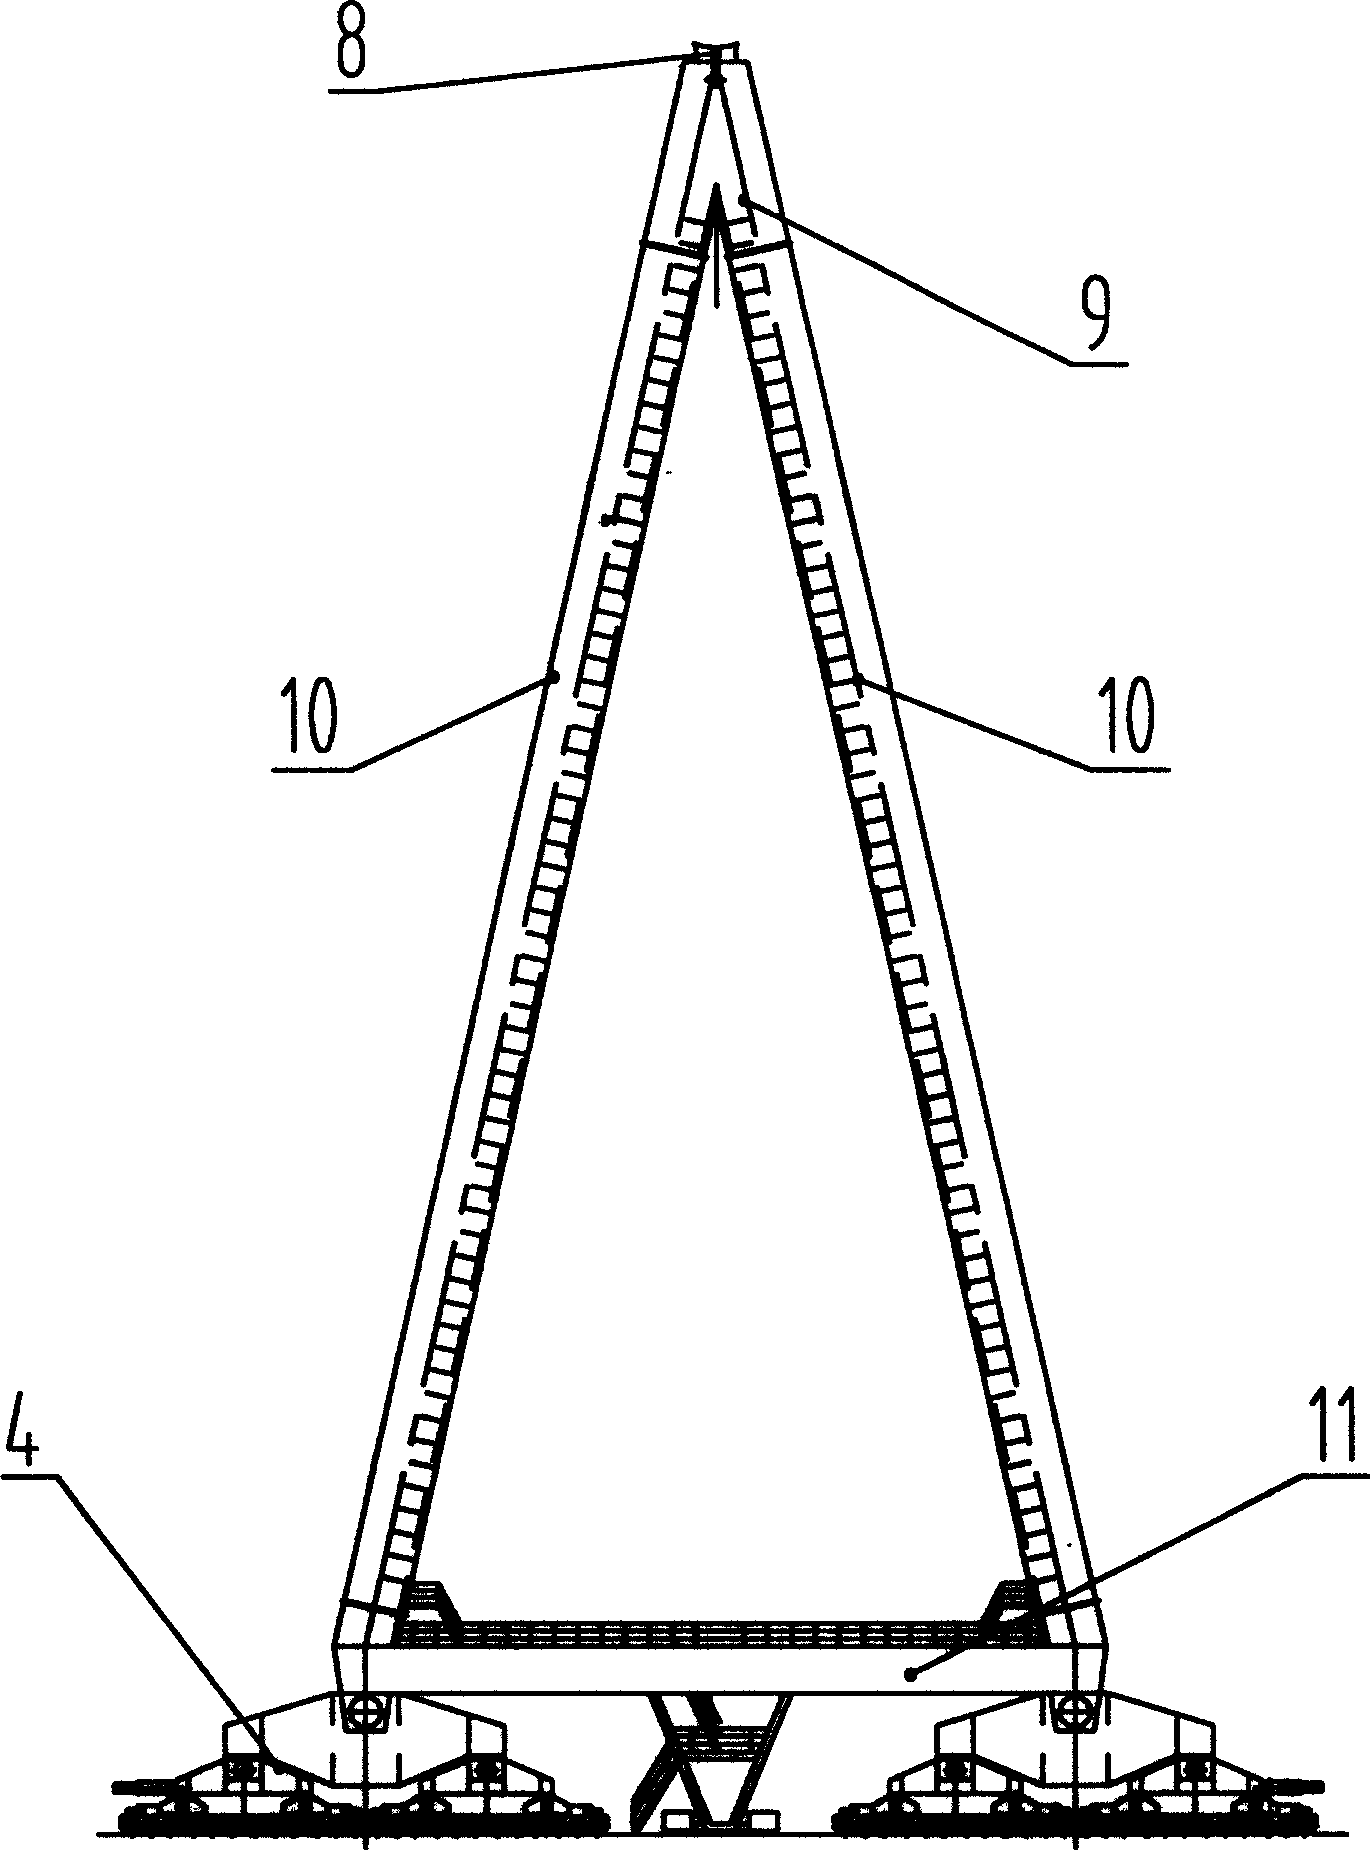 Method and apparatus for assembly of portal crane in shipbuilding